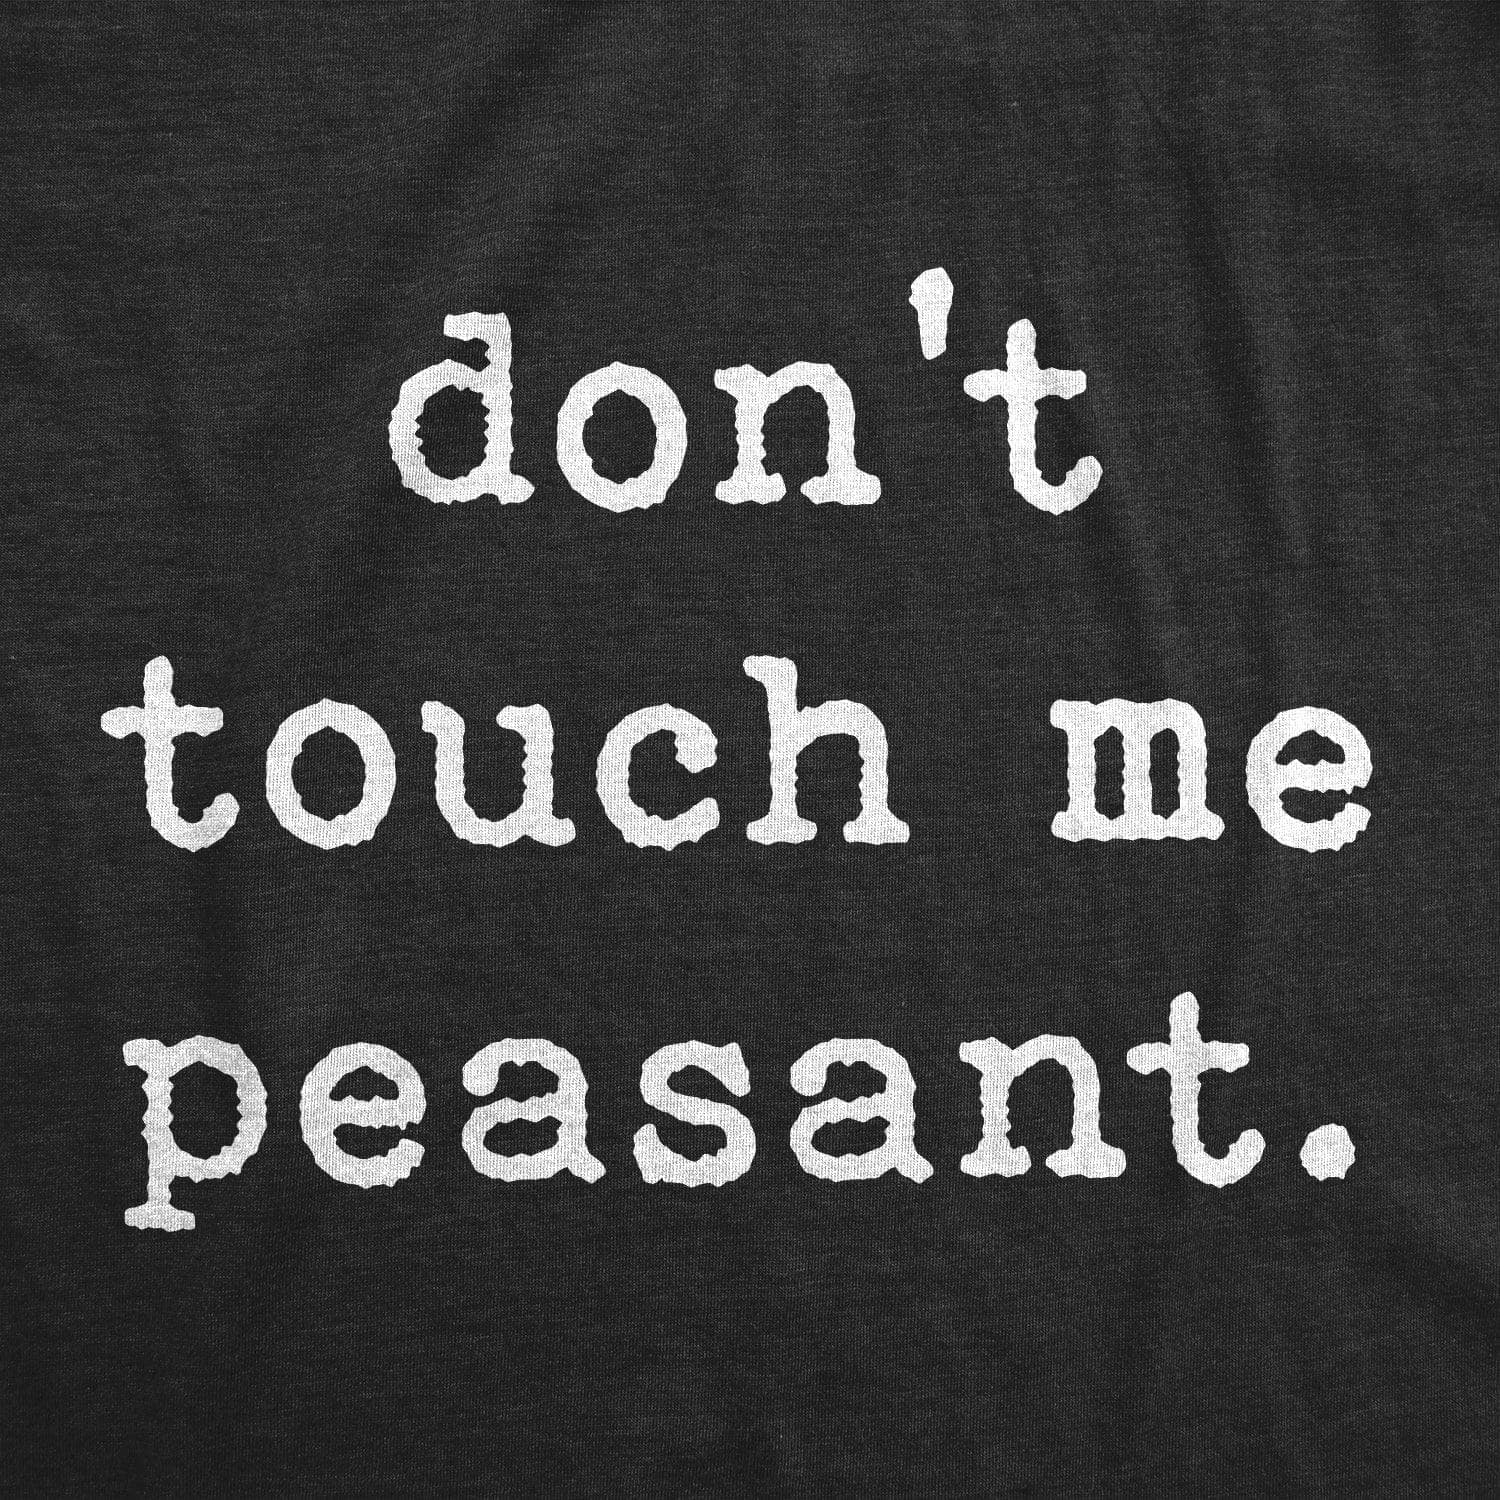 Don't Touch Me Peasant Baby Bodysuit  -  Crazy Dog T-Shirts